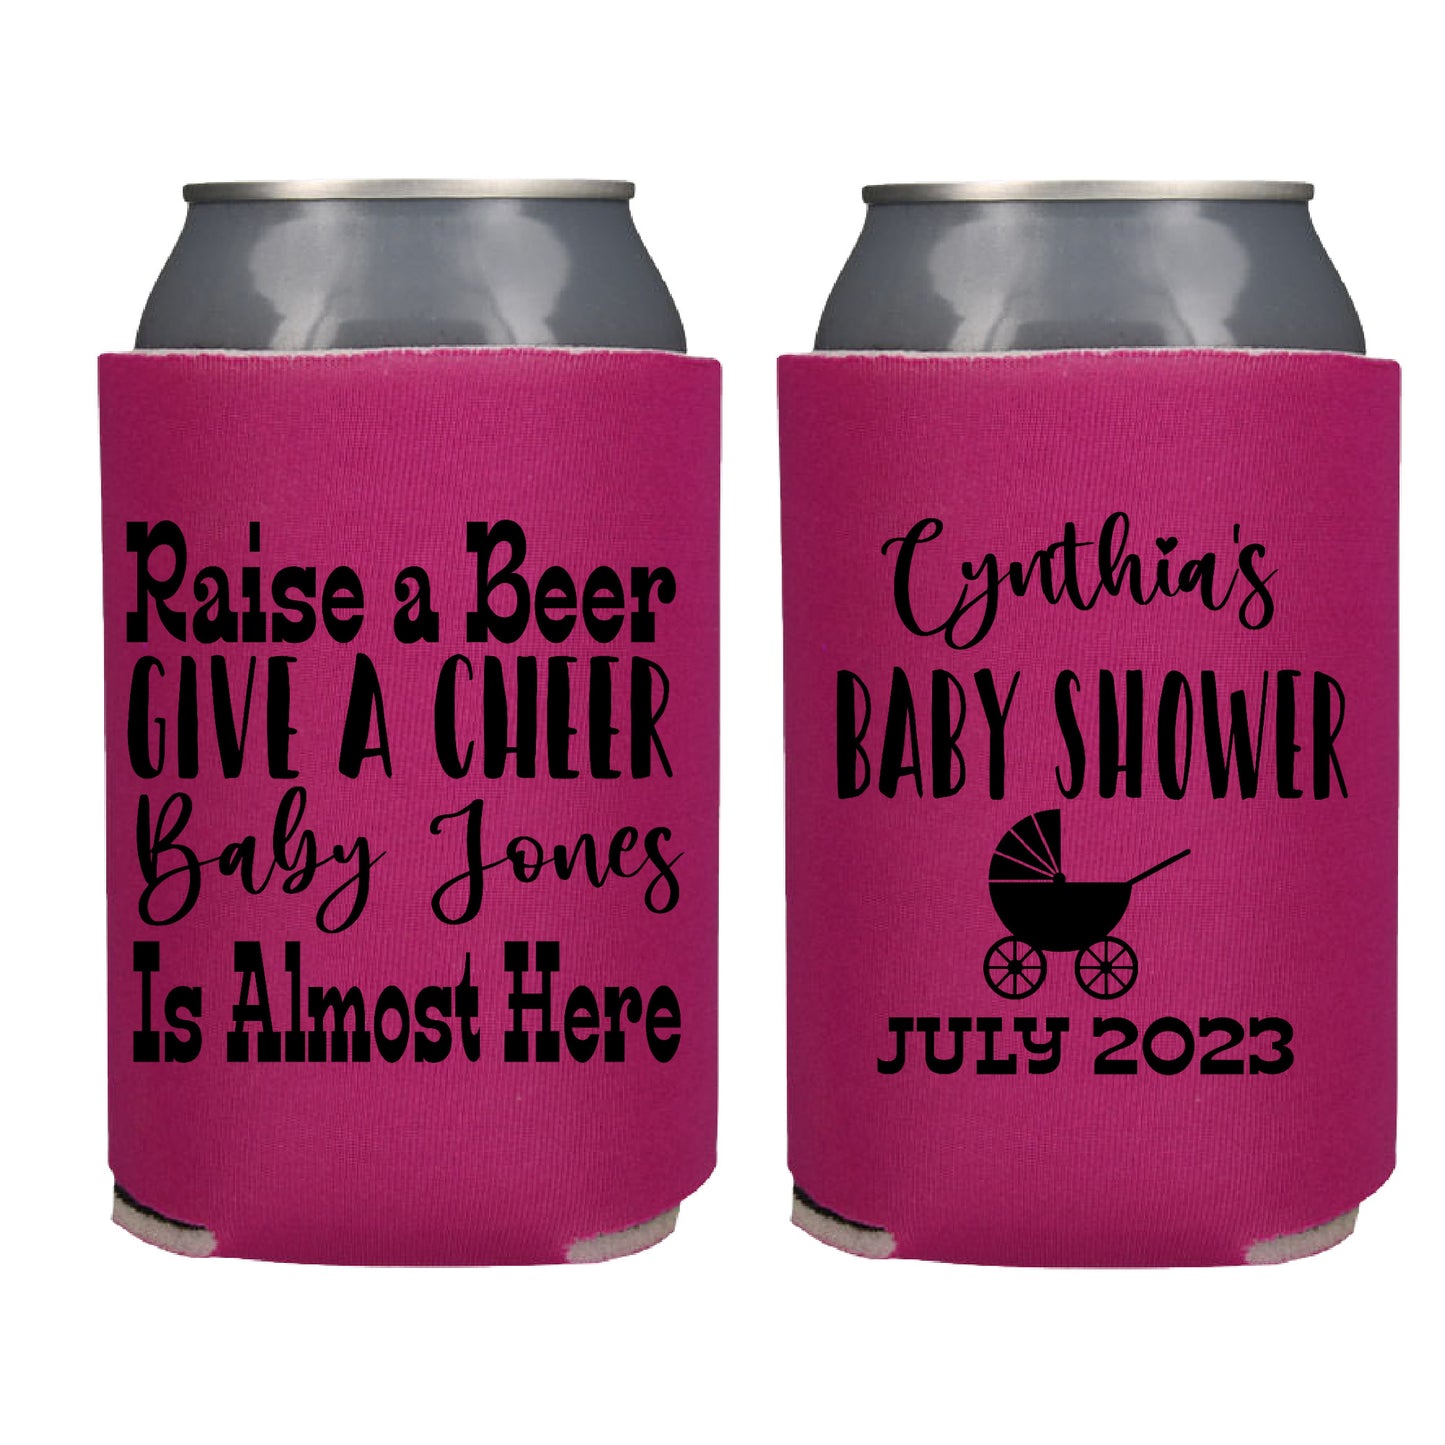 Raise a Beer Give a Cheer Baby is Almost Here Baby Shower Party Favor Screen Printed Can Cooler